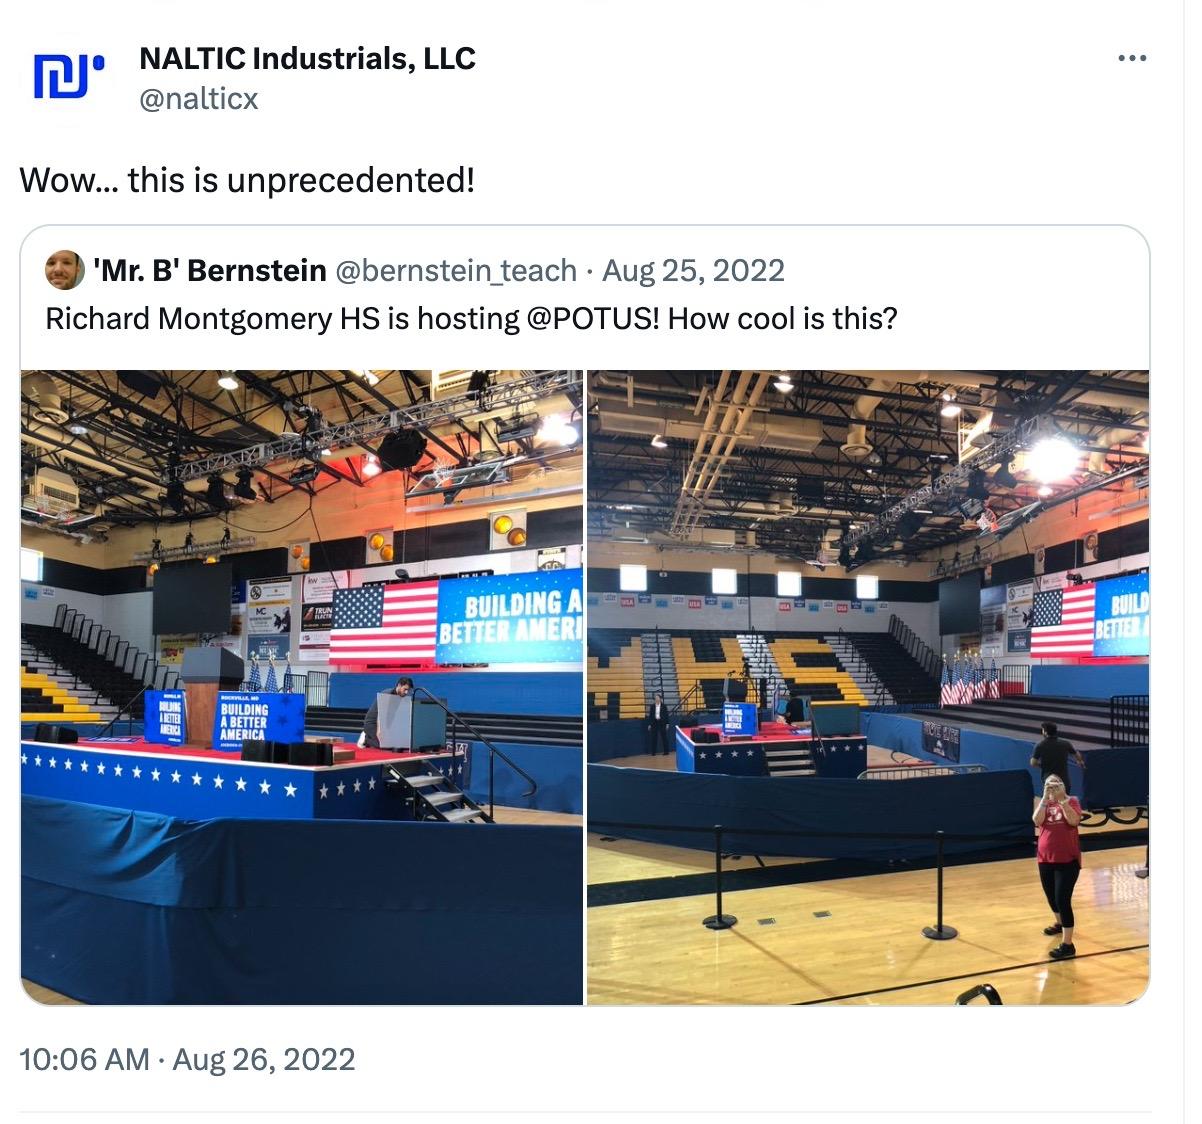 A screenshot of a Tweet posted by NALTIC Industrials, LLC (@nalticx) on August 26, 2022, quoting a Tweet by 'Mr. B.' Bernstein (@bernstein_teach) dated Aug 25, 2022. NALTIC's QT says: "Wow...this is unprecedented!" Bernstein's tweet is captioned, "Richard Montgomery HS is hosting @POTUS! How cool is this?" The two photos show the inside of a high school gymnasium with a temporary stage set up in the middle. A banner on the wall reads "BUILDING A BETTER AMERICA" and features an American flag. People are setting up the stage in preparation for Biden's speech. At the top of the gym wall, you can see that the windows have been removed and fitted with yellow air ducts.